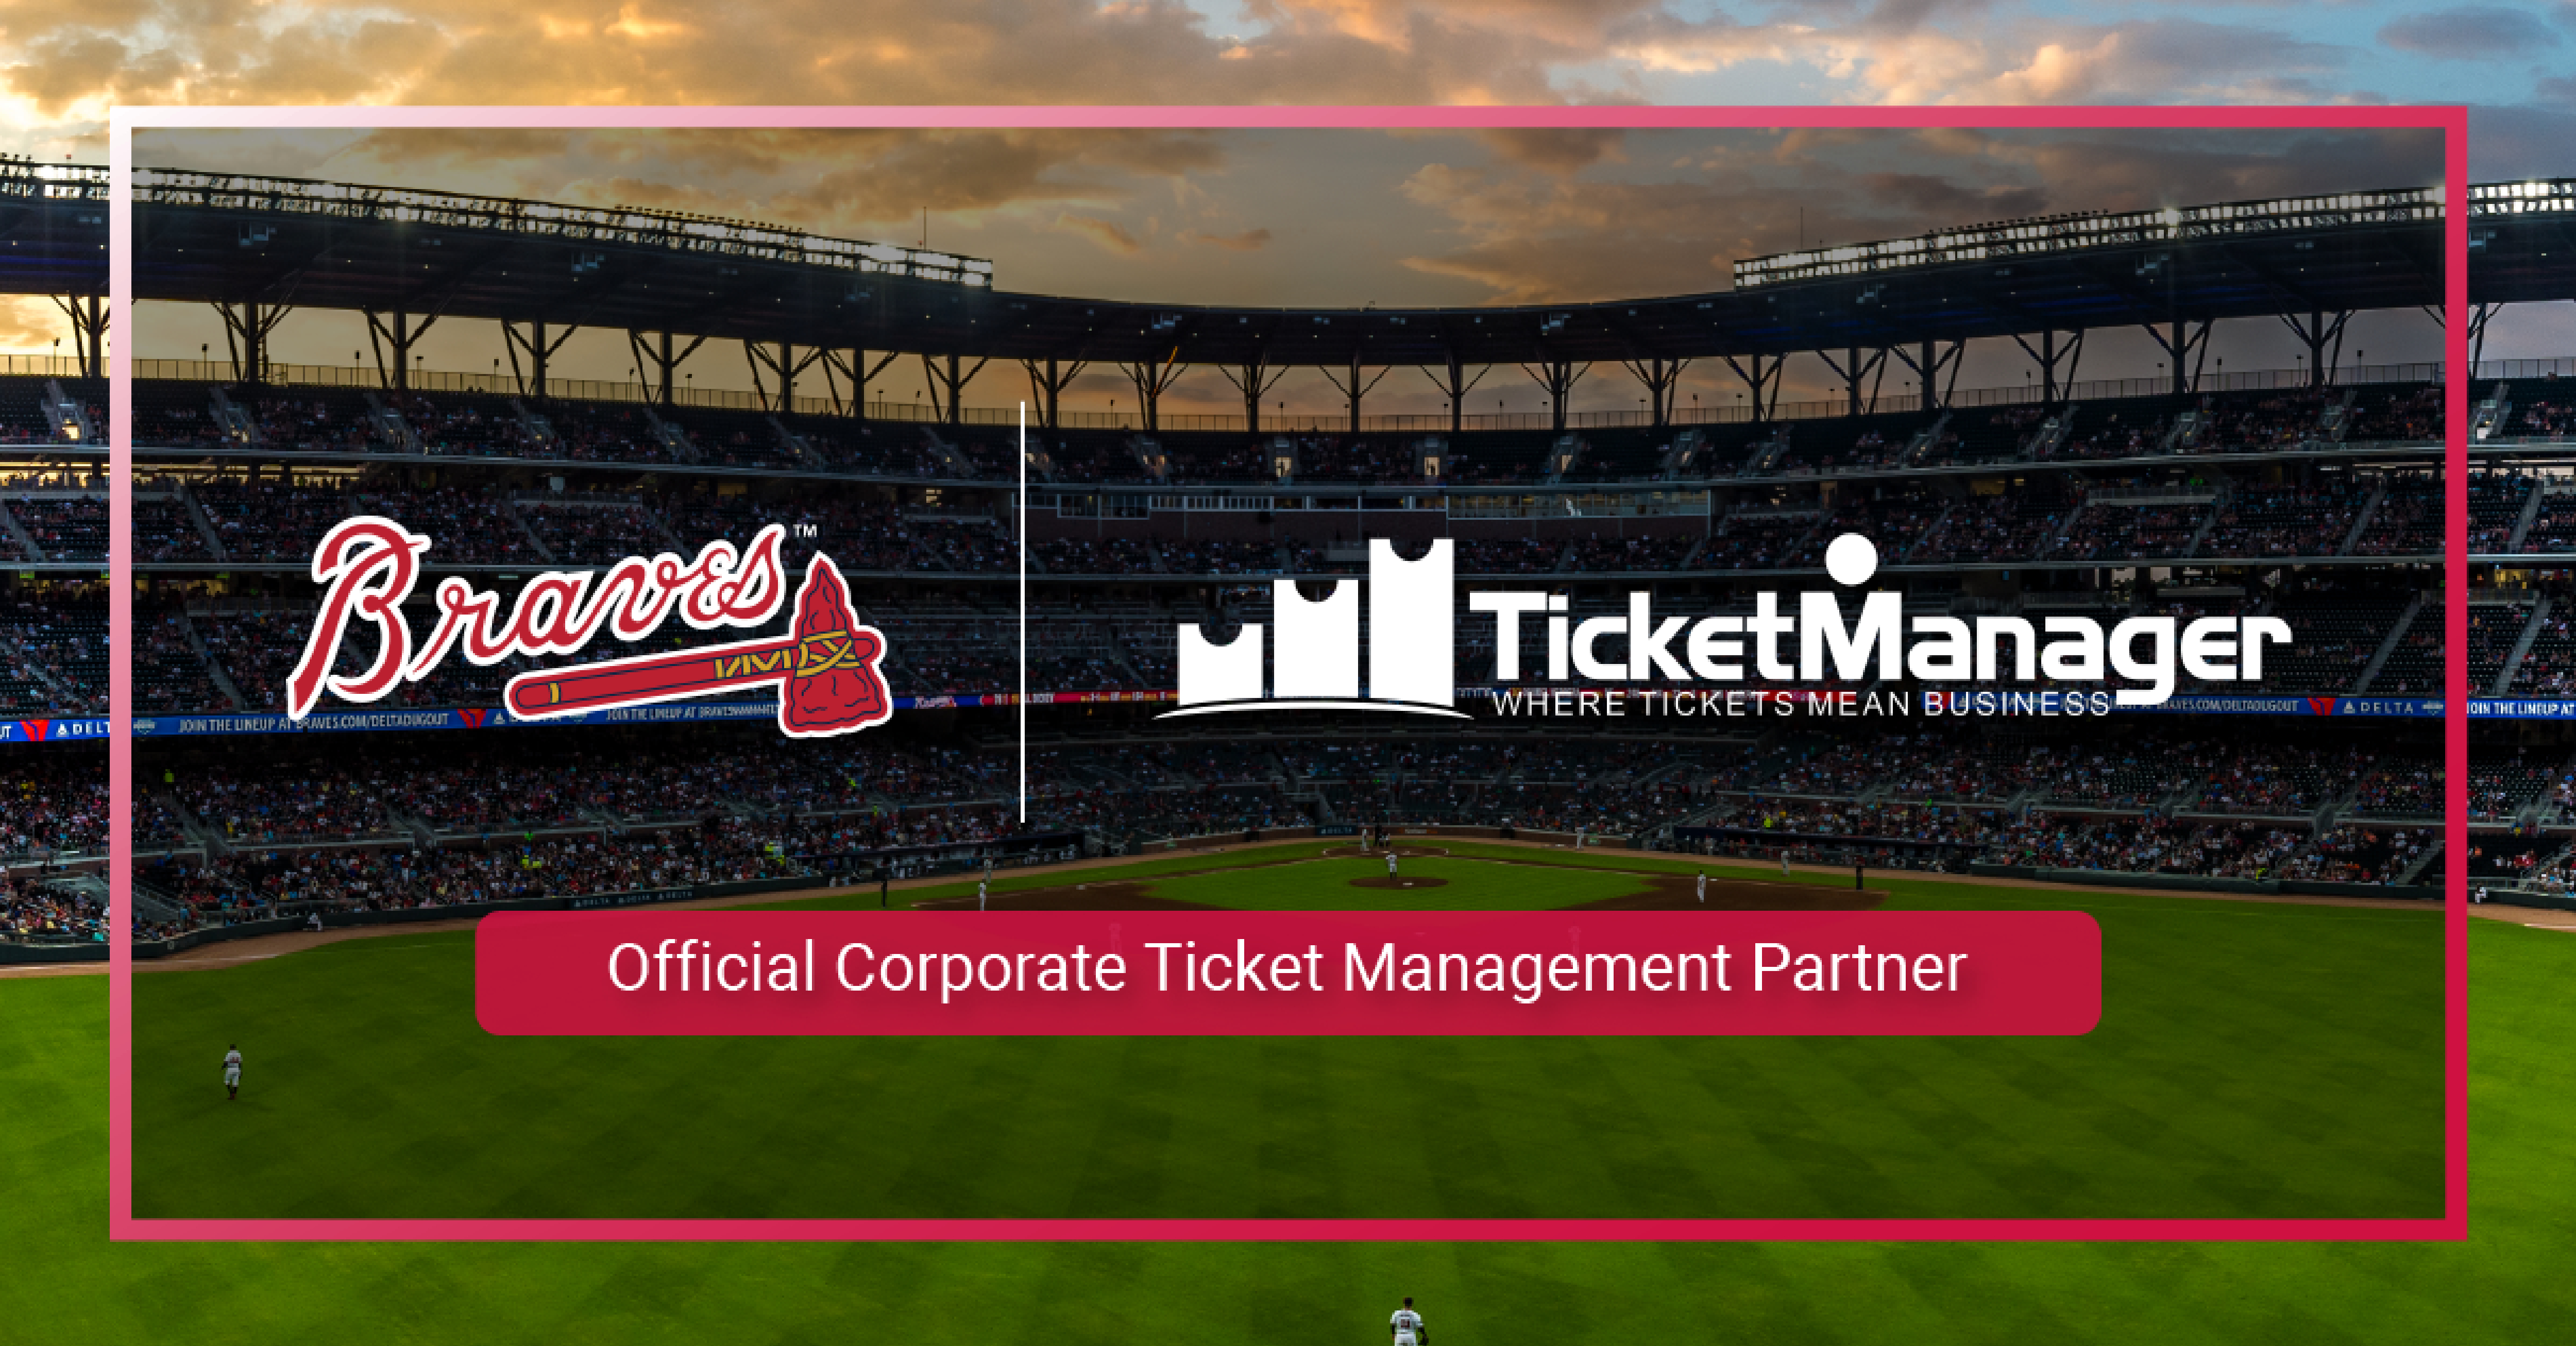 TicketManager Named Official Corporate Ticket Management Partner